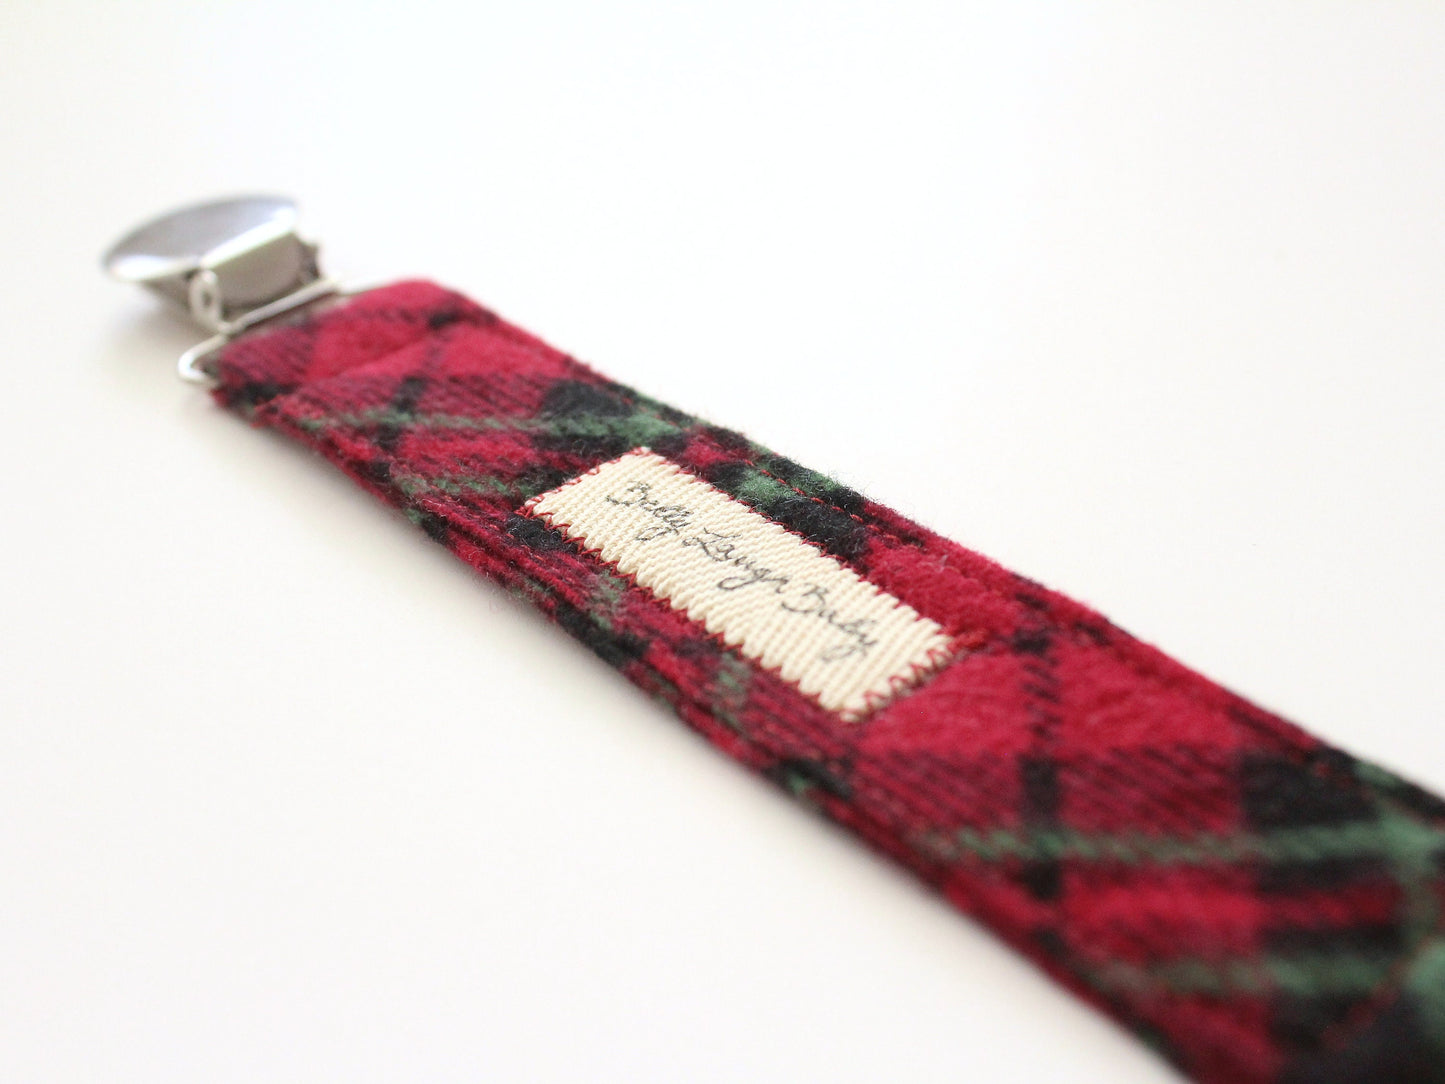 Red and Green Plaid Fabric Pacifier Clip | Gender Neutral Baby Gift | Soother Leash Binky Holder | CPSC Compliant